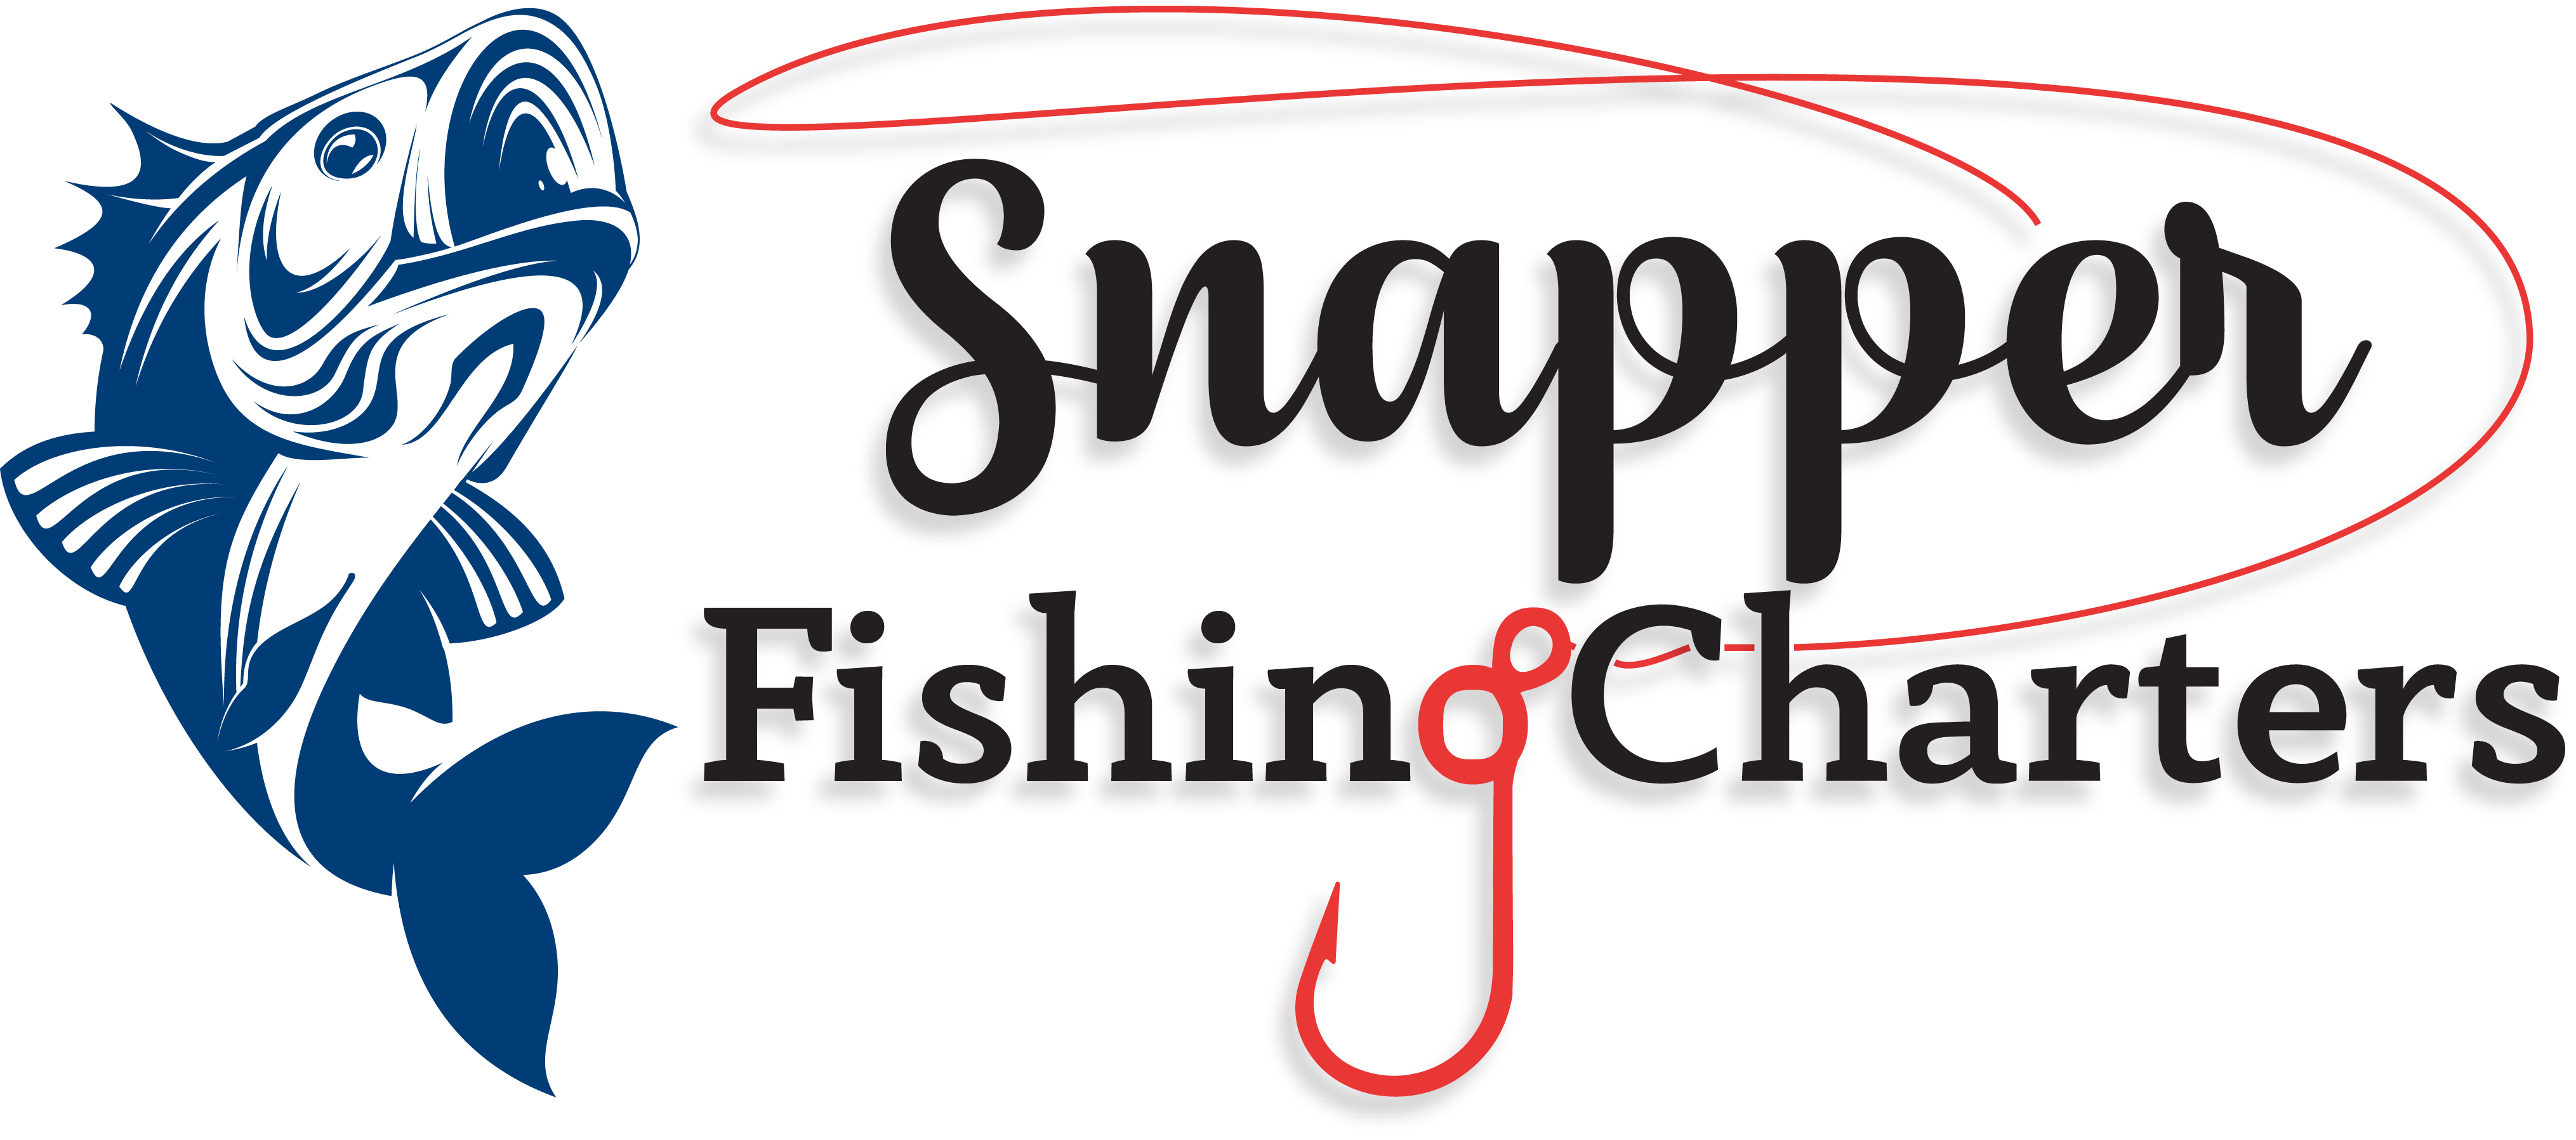 Snapper Fishing Charters Auckland